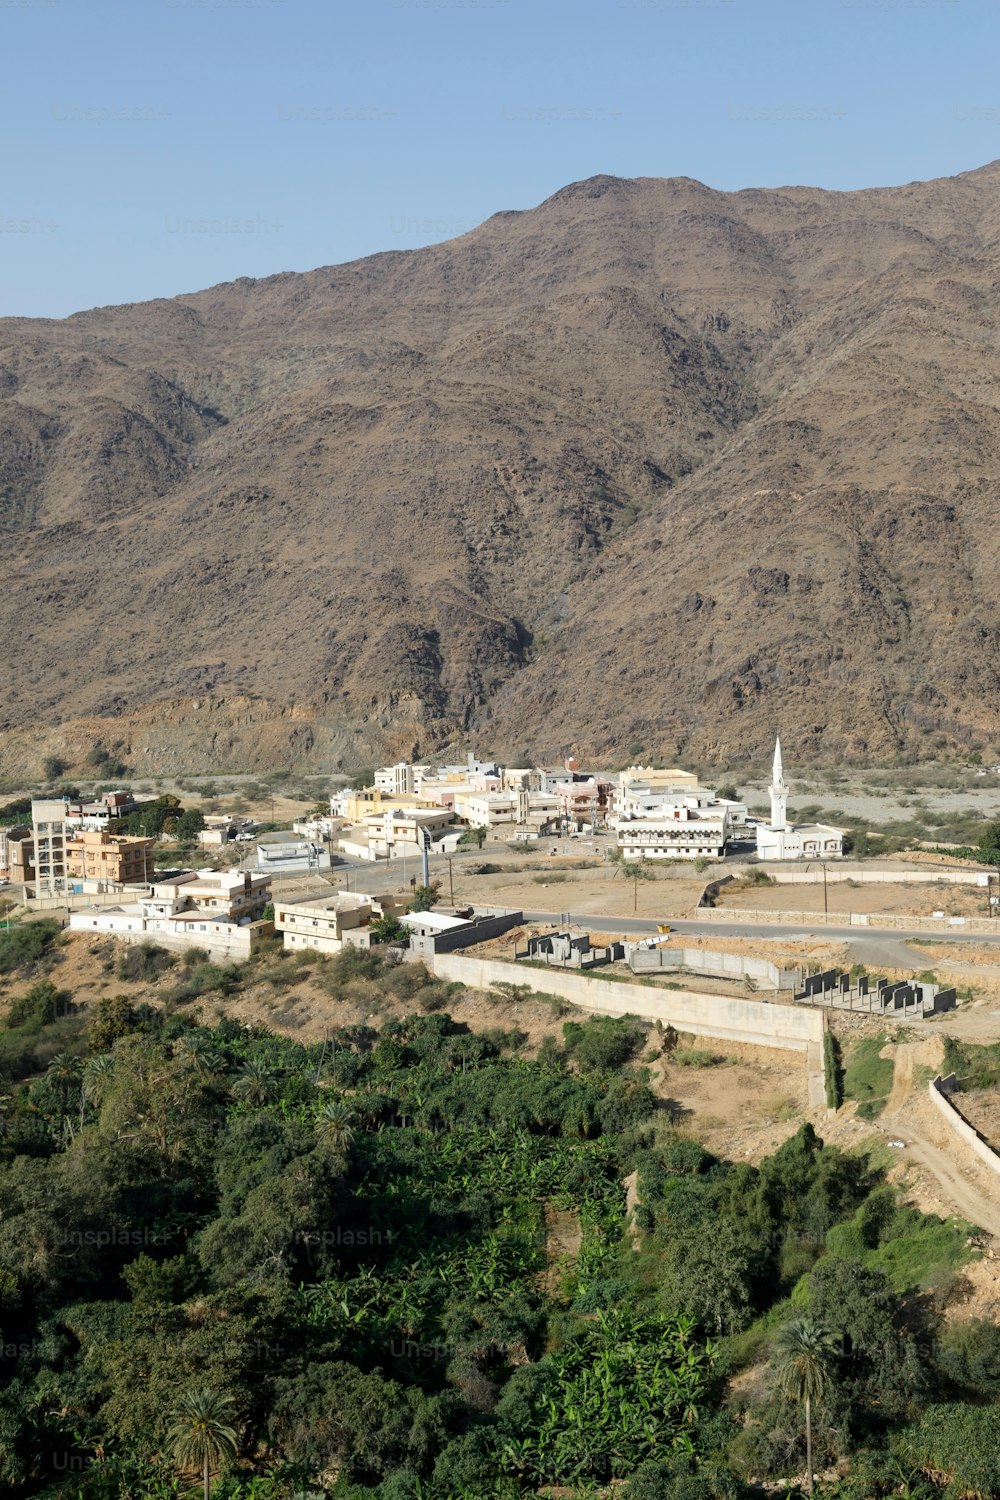 View from the Thee-Ain heritage site in Al-Baha, Saudi Arabia towards the village of the same name